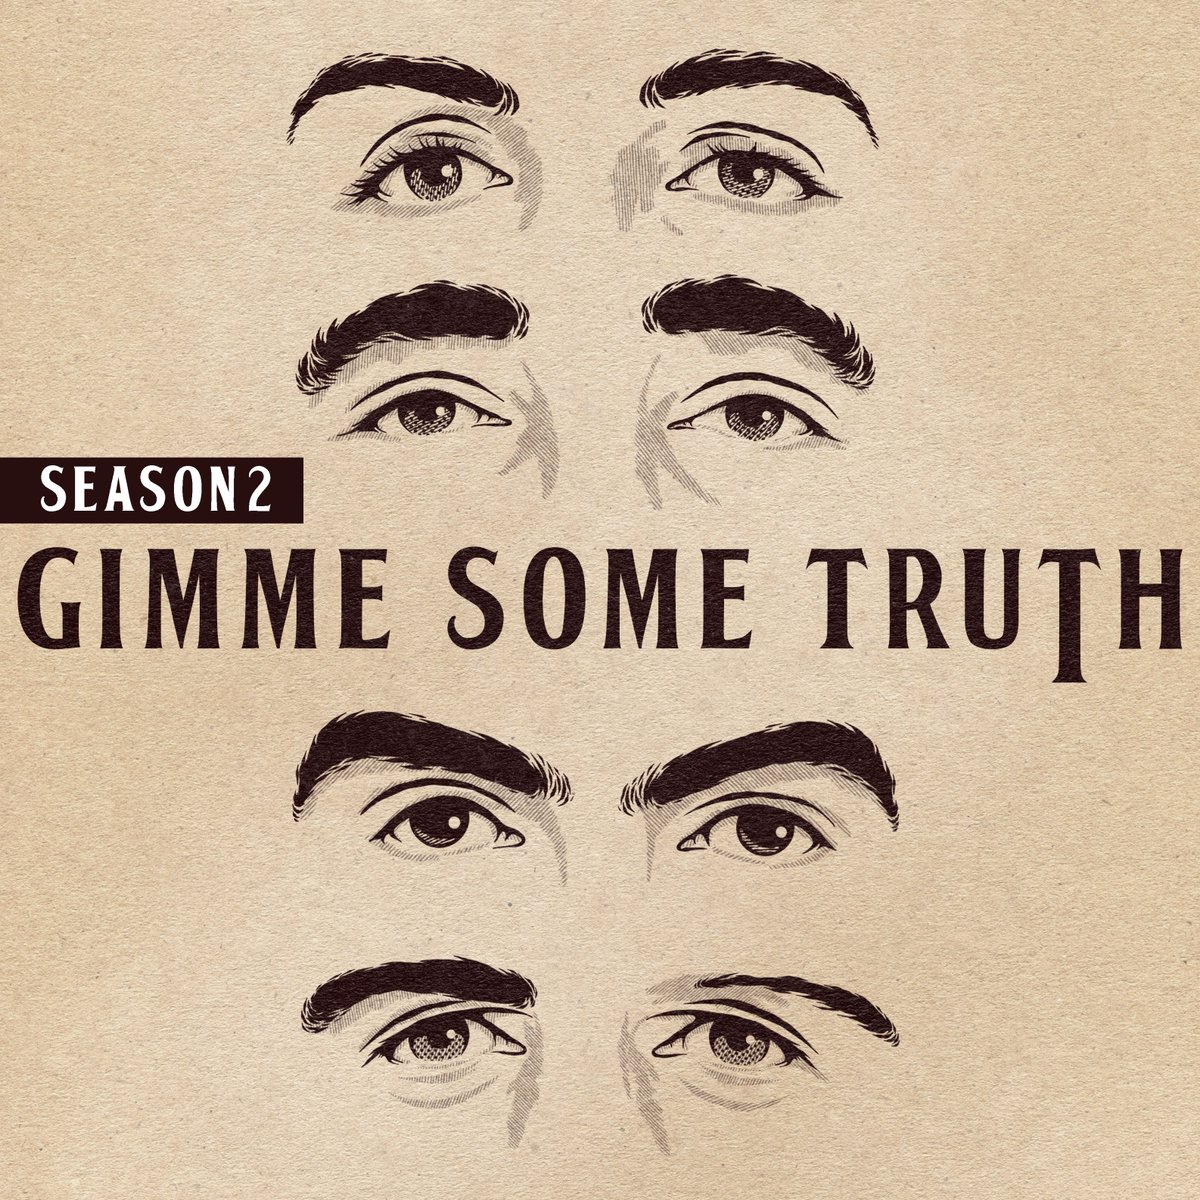 Announcing Season 2 of Gimme Some Truth! New episodes every week starting next Wednesday 5 April on @ApplePodcasts @Spotify or wherever you listen 🎧 gimmesometruth.podbean.com #Beatles #TheBeatles